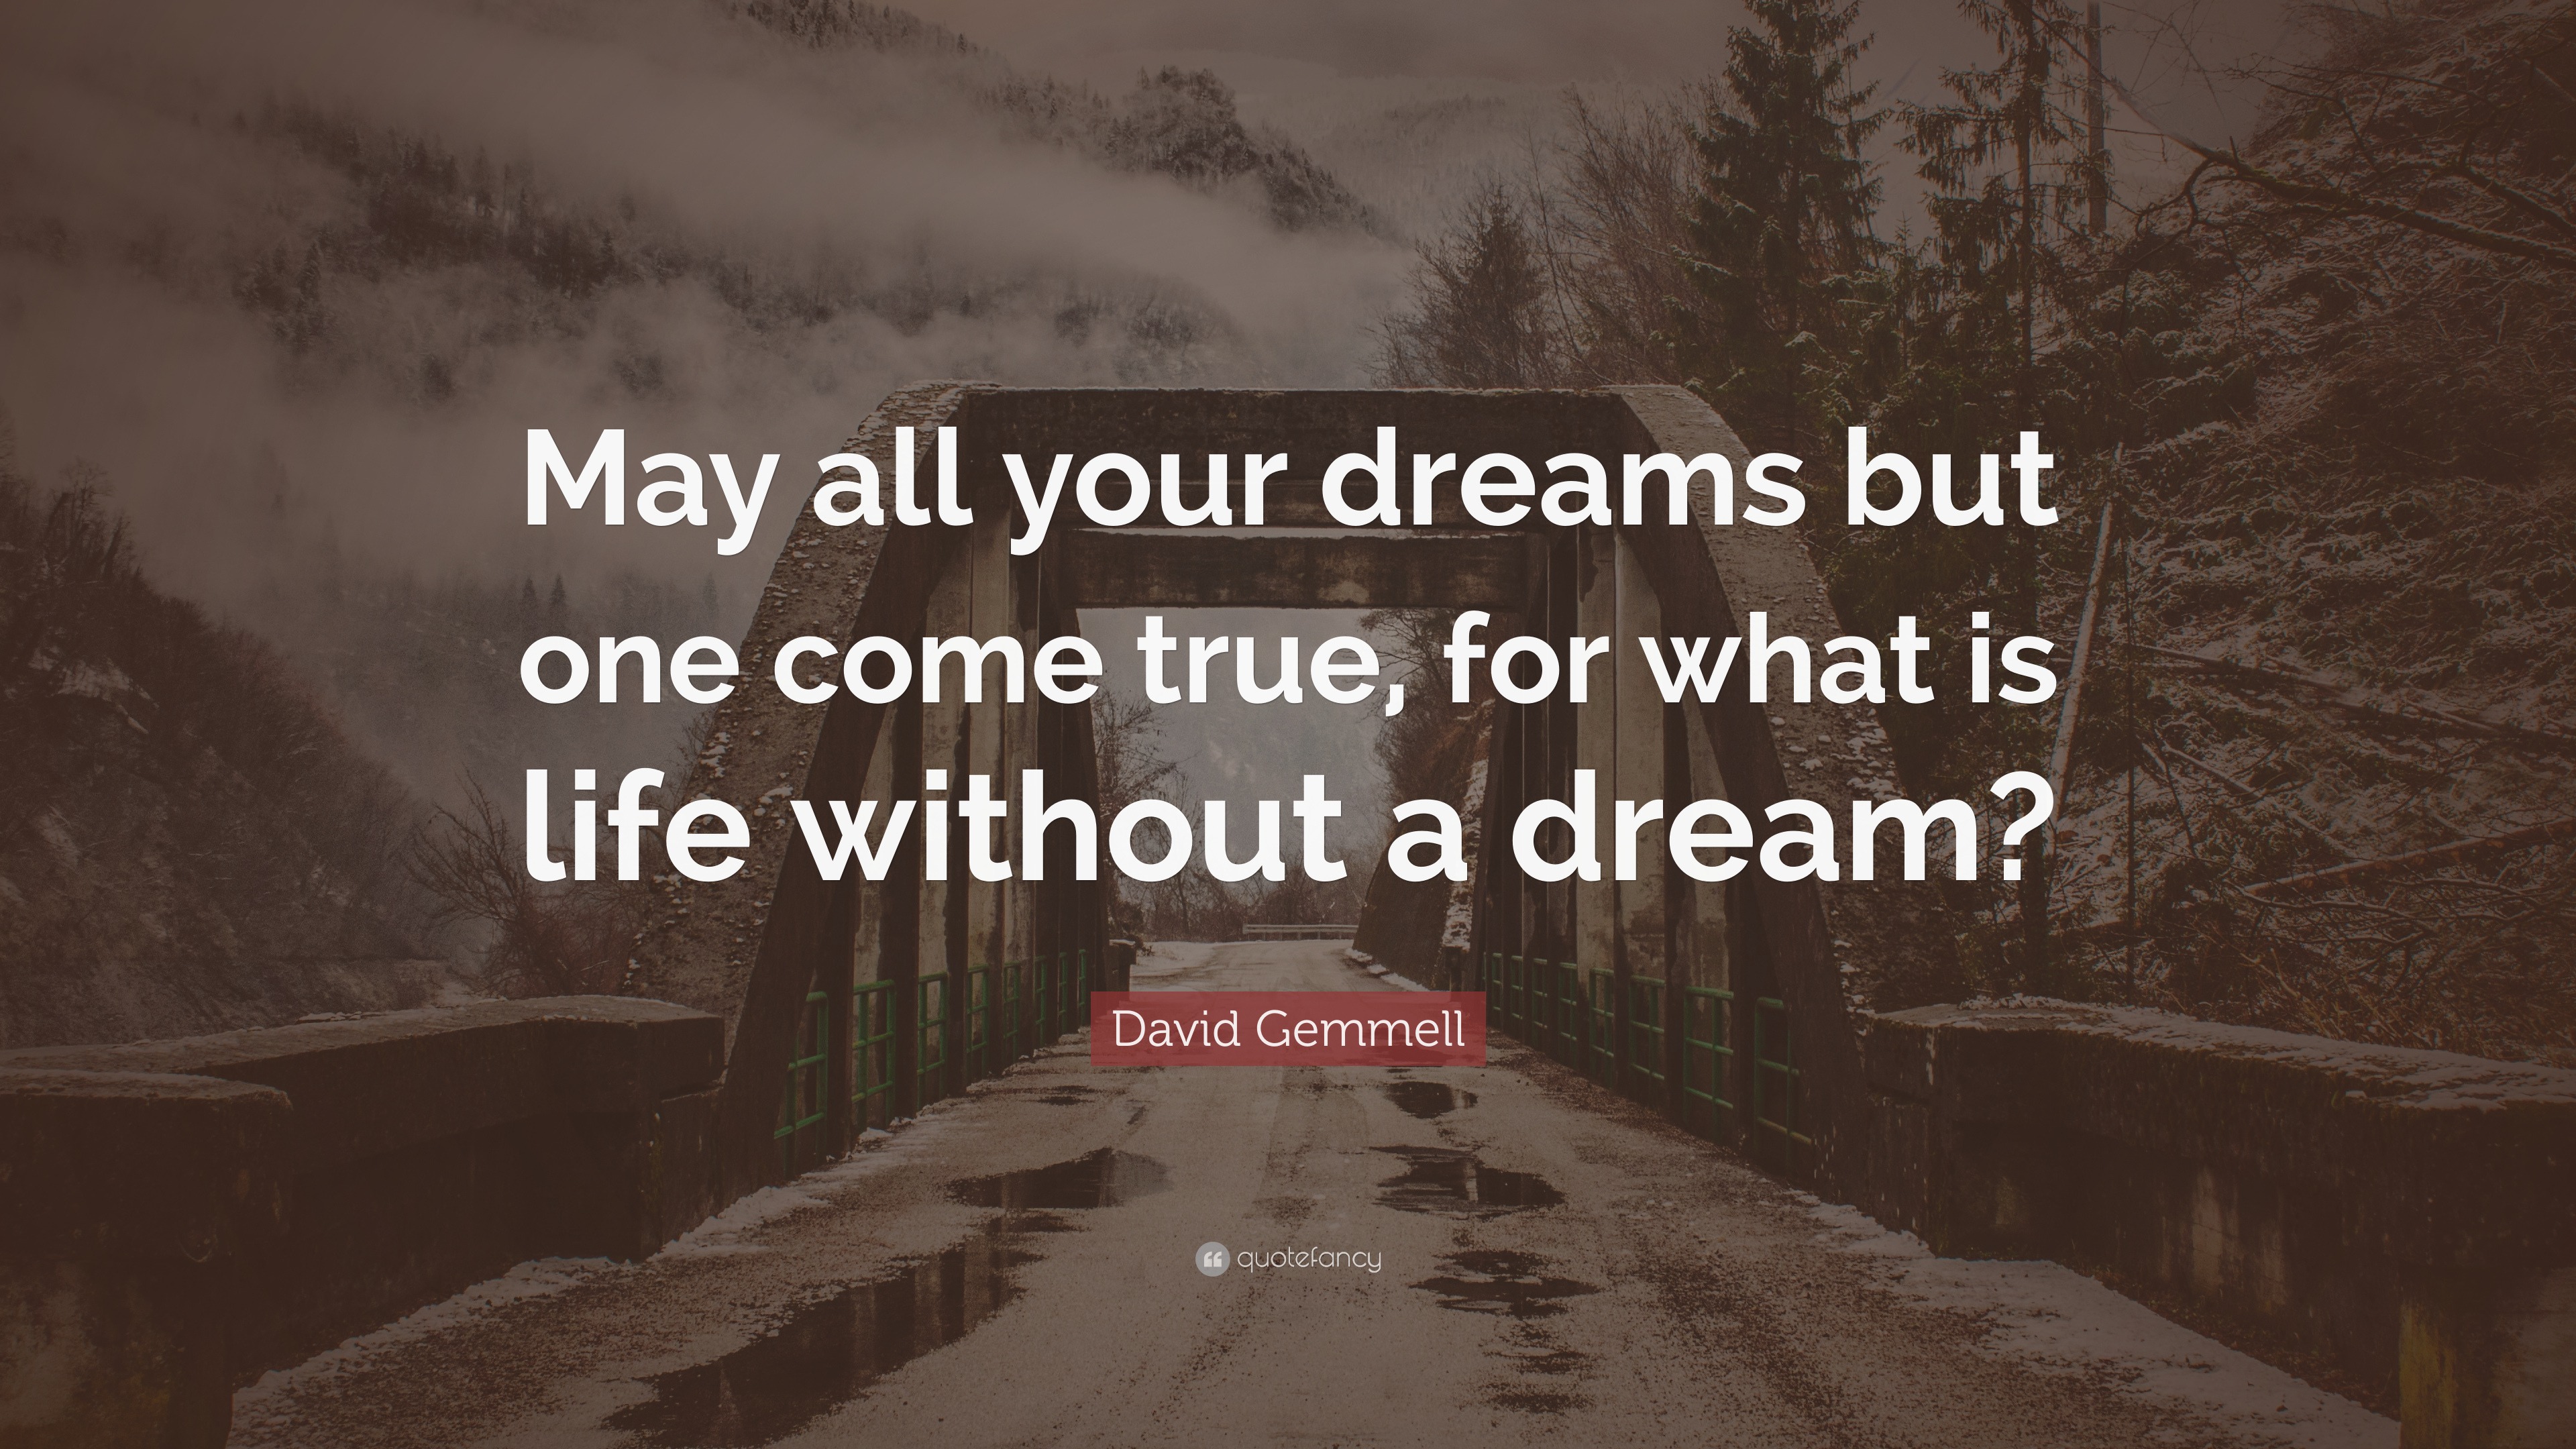 David Gemmell Quote: “May all your dreams but one come true, for